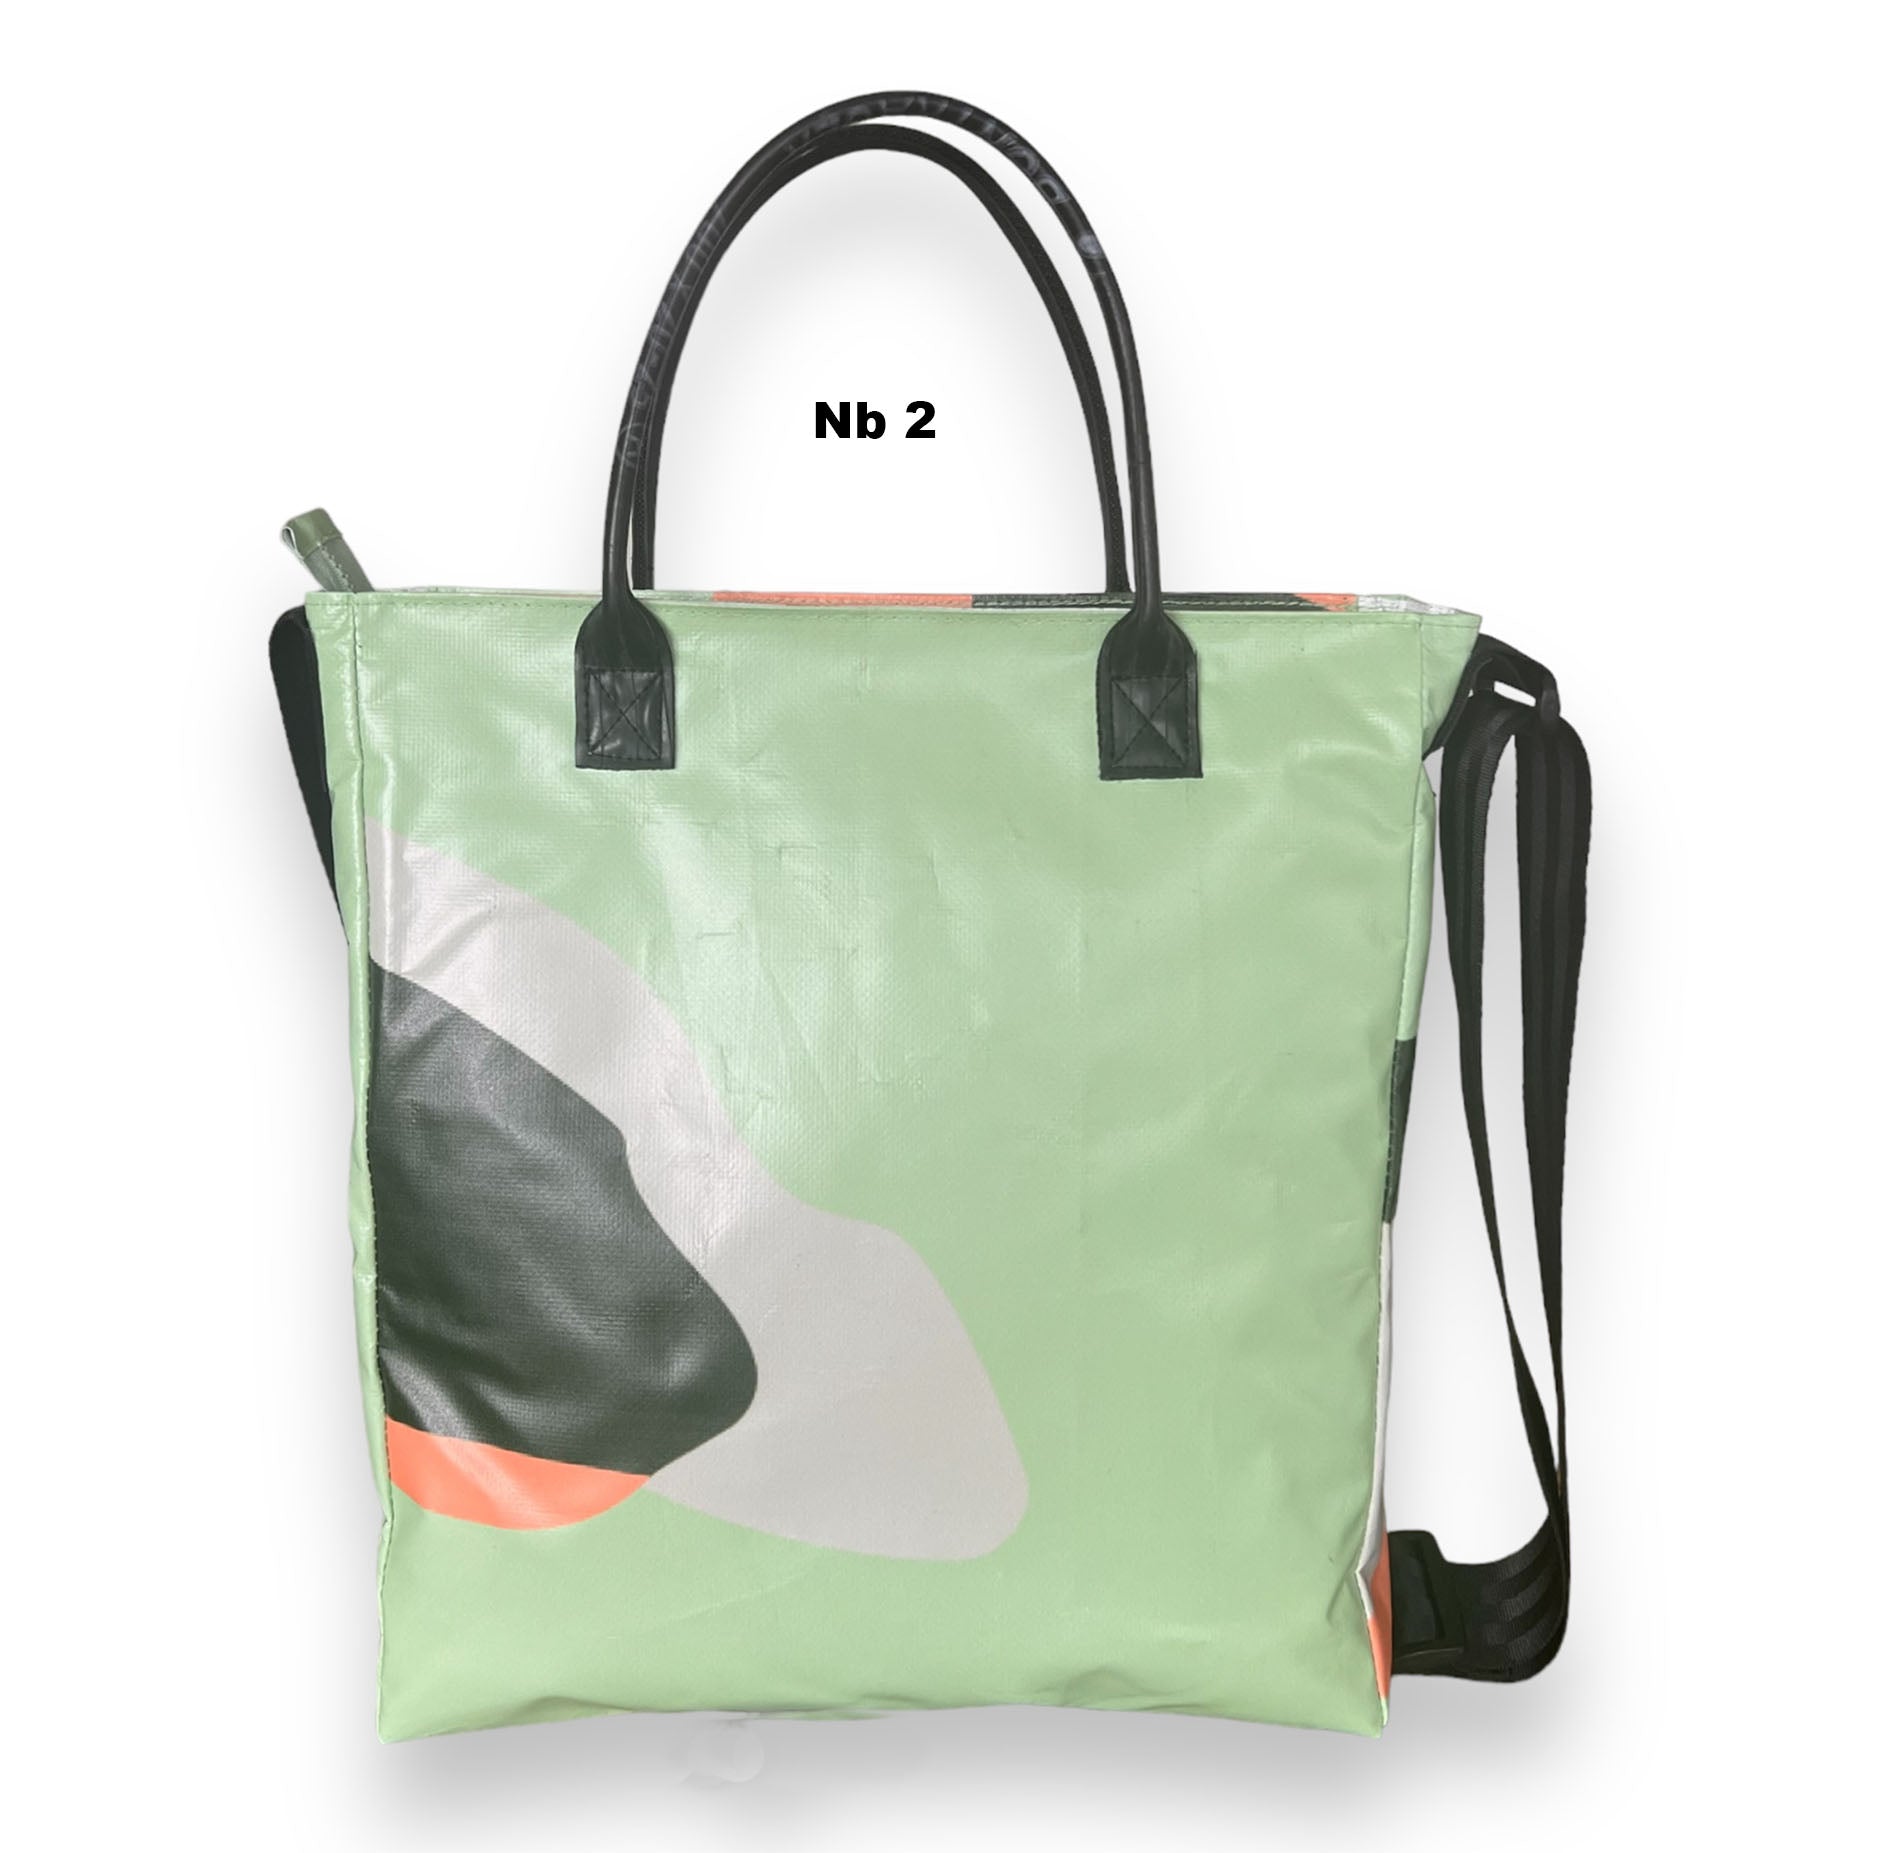 Upcycled materiał bags, made from building banners, bags made from building banners